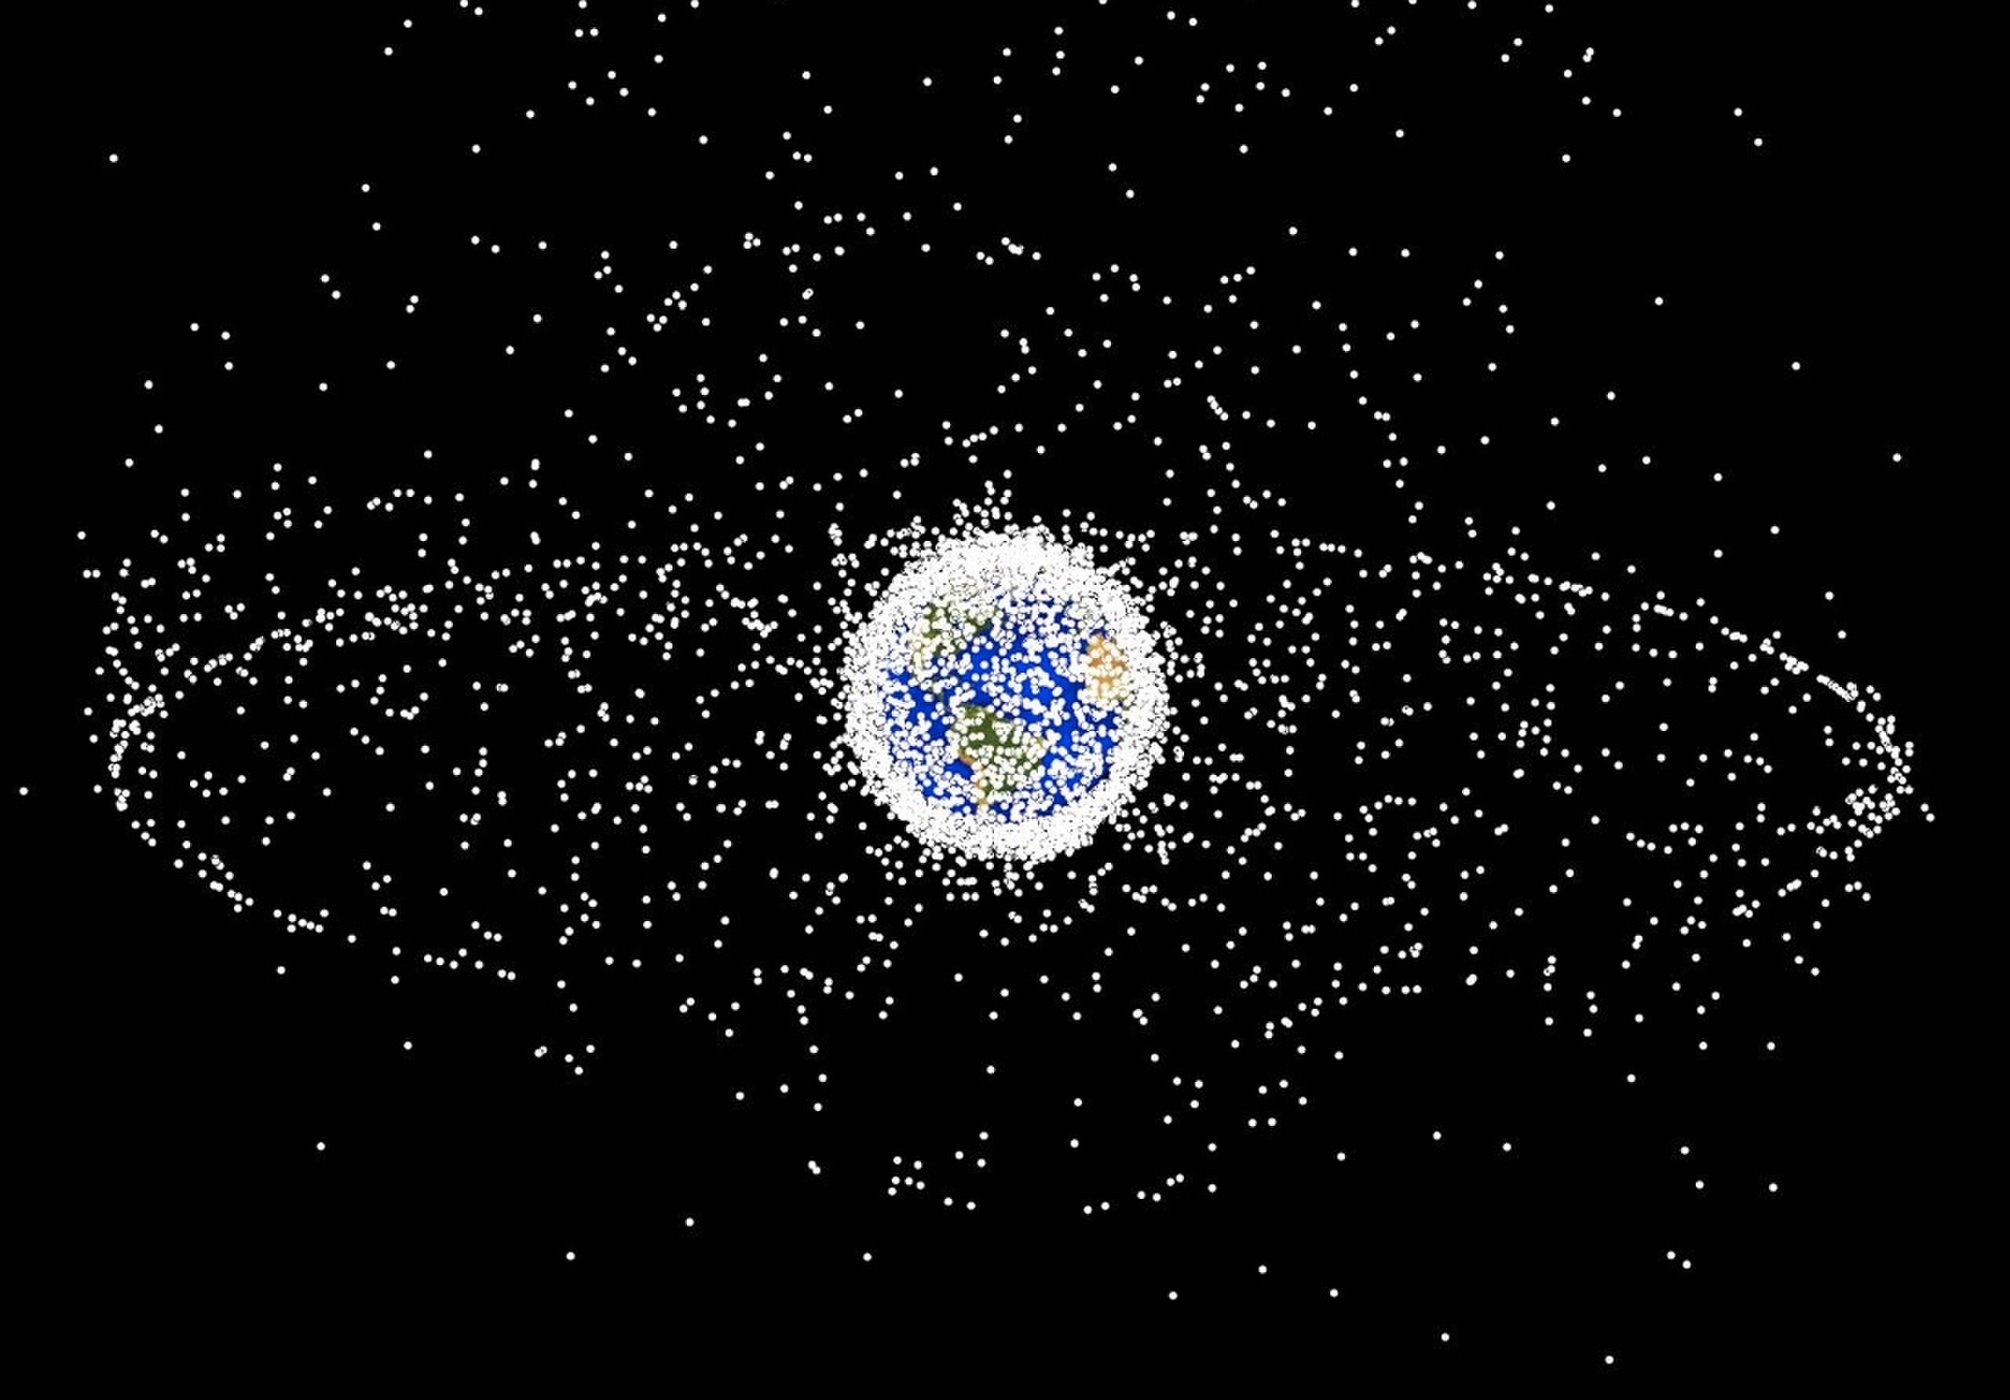 There’s an ’empty trash bag’ circling our planet